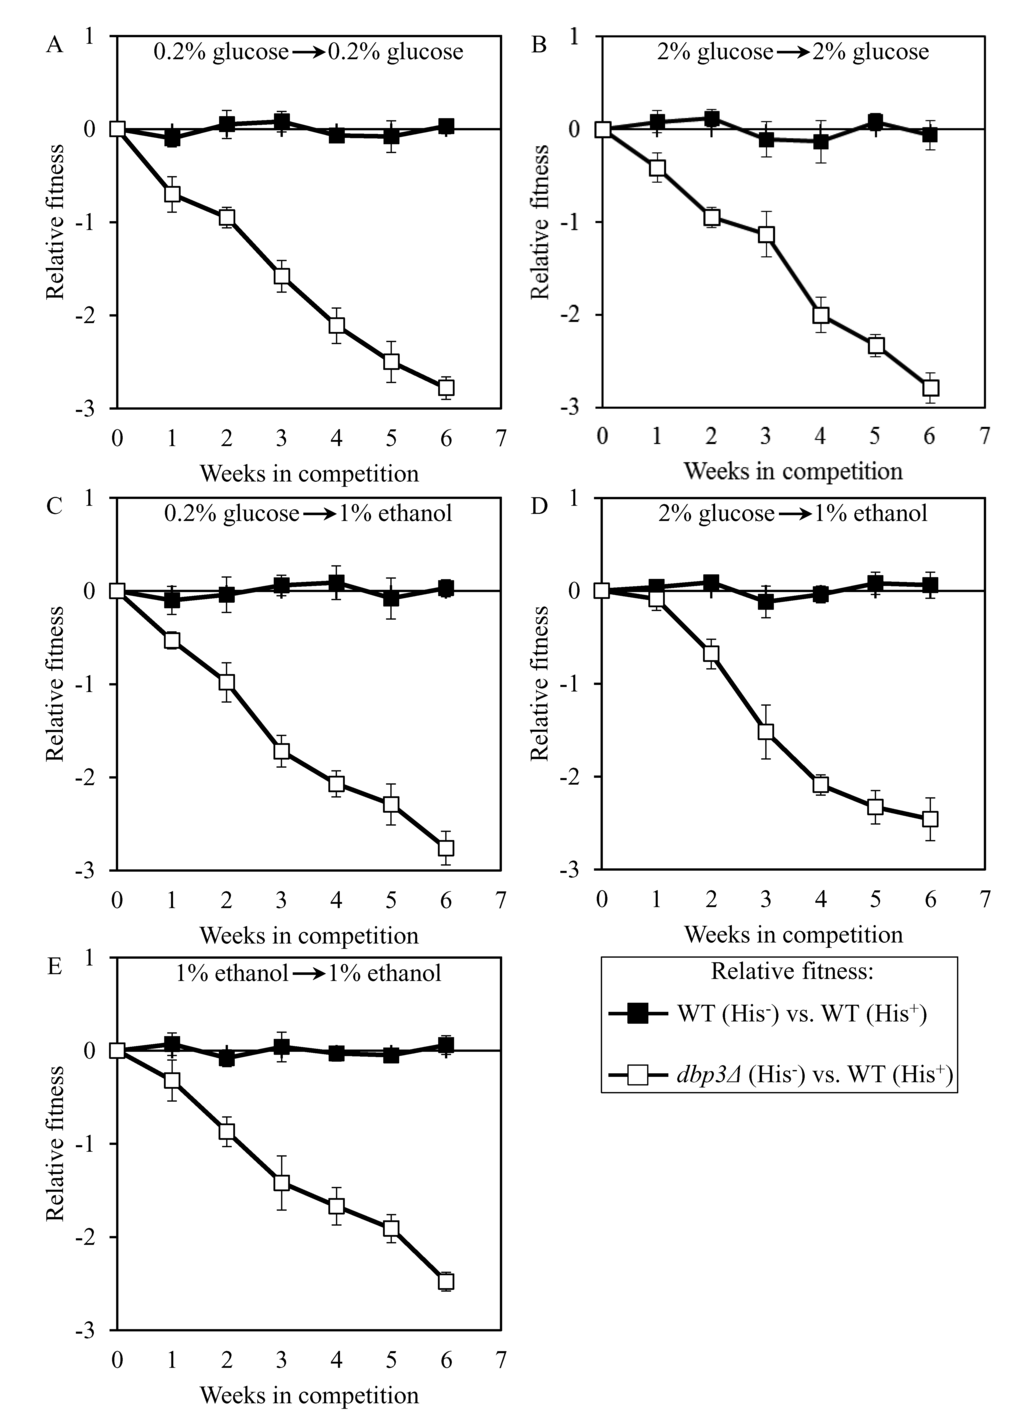 Validation of the developed assay for quantifying the relative fitness of a long-lived mutant strain in direct competition with a parental WT strain. The WT strains BY4742 (His-) and BY4739 (His+, but otherwise isogenic to BY4742) were cultured separately in the complete YP medium containing 0.2% glucose, 2% glucose or 1% ethanol glucose until mid-exponential phase. Another pair of strains whose relative fitness was measured, namely the long-lived mutant strain dbp3Δ (His-; is isogenic to BY4742) and the WT strain BY4739 (His+), was also cultured separately in YP medium containing 0.2% glucose 2% glucose or 1% ethanol glucose until mid-exponential phase. Cells of the His+ strain were mixed with the same number of cells of the His- strain and then co-cultured for 7 days in liquid YP medium initially containing different carbon sources. Cells of the His- and His+ strains pre-cultured separately on 0.2% glucose were subjected to direct fitness competition by being cultured together on 0.2% glucose (A) or 1% ethanol (C). Cells of the His- and His+ strains pre-cultured separately on 2% glucose were subjected to direct fitness competition by being cultured together on 2% glucose (B) or 1% ethanol (D). Cells of the His- and His+ strains pre-cultured separately on 1% ethanol were subjected to direct fitness competition by being cultured together on 1% ethanol (E). After culturing the cell mixture for 7 days, an aliquot of cell suspension was used to measure the relative fitness of the His+ strain in direct competition with the His- strain (as described in ″Materials and Methods″). The direct fitness competition step of culturing a cell mixture for 7 days in liquid YP medium was repeated 6 times.